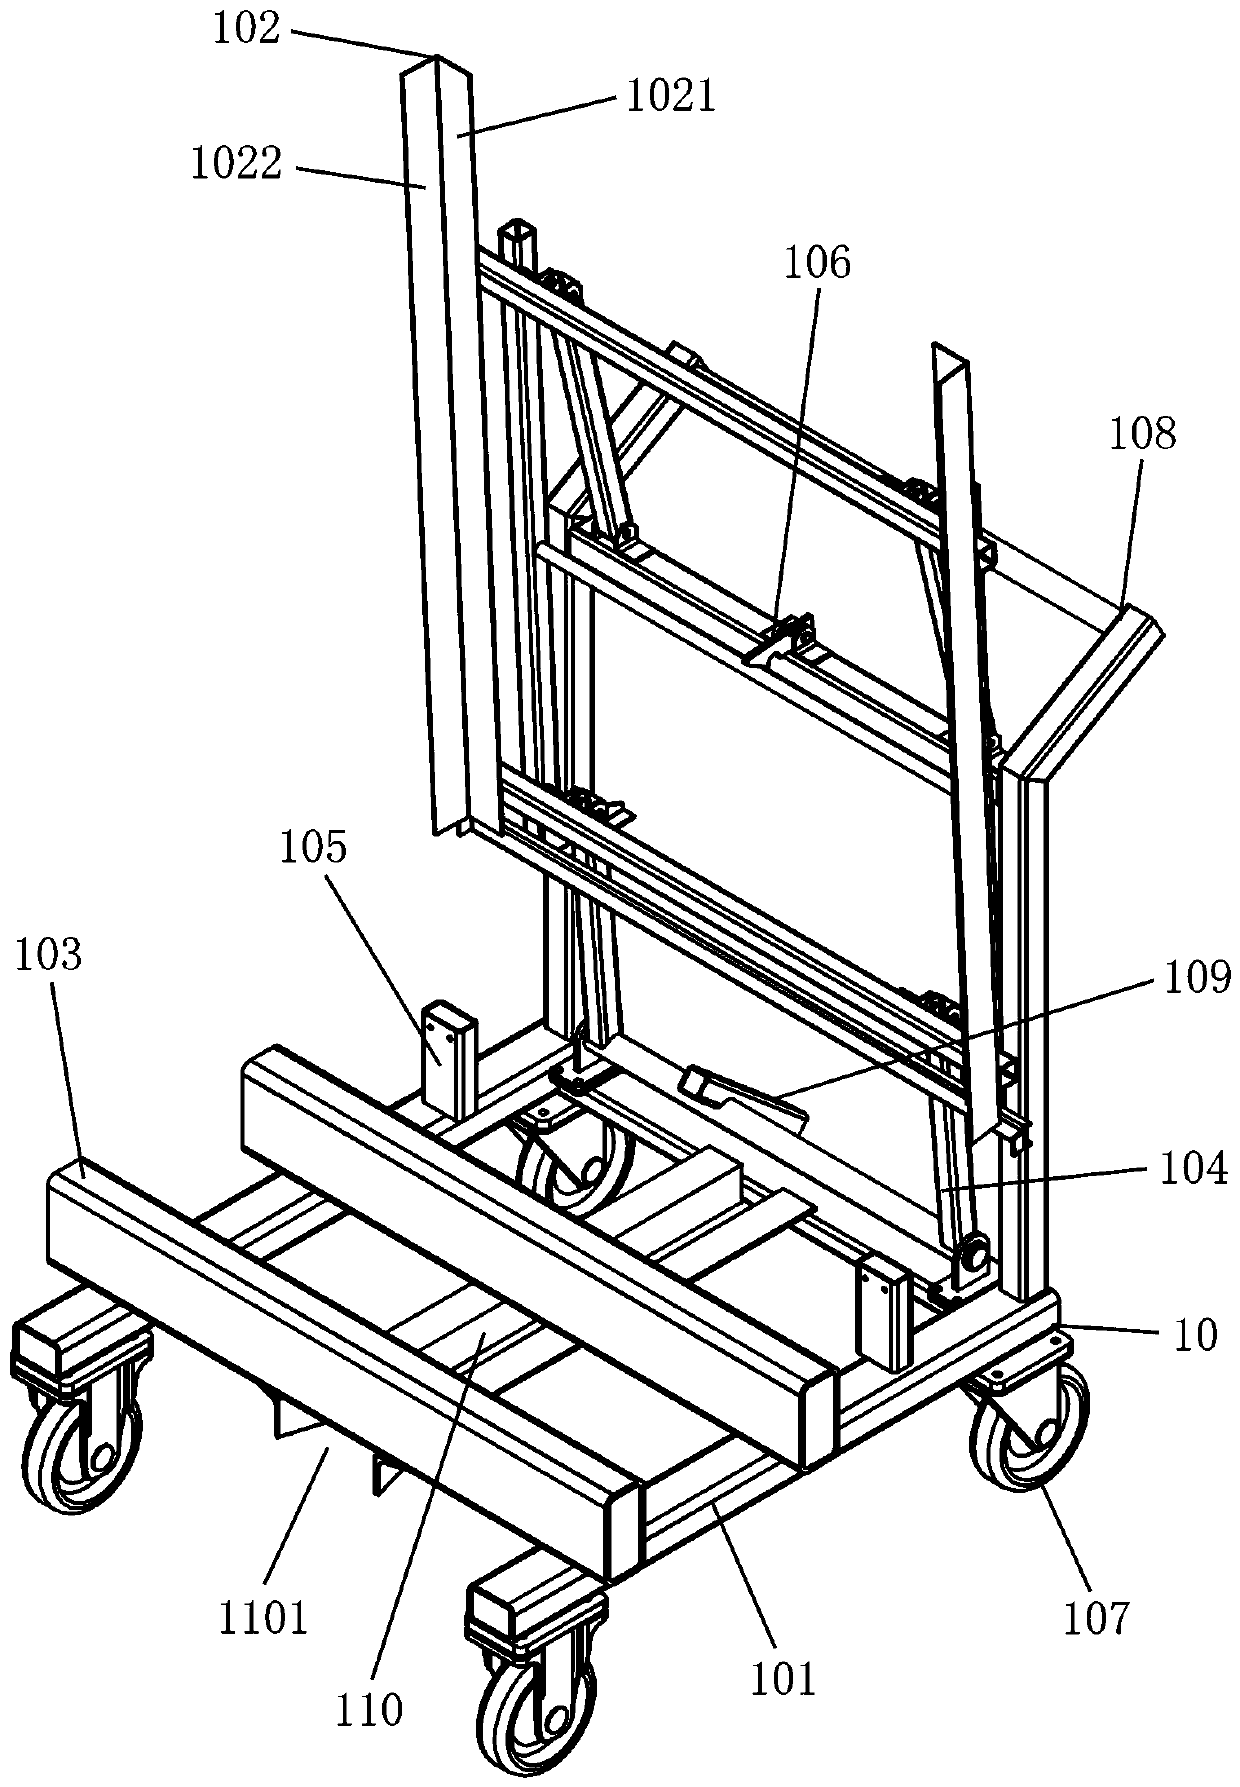 Feed trolley used for stacked materials